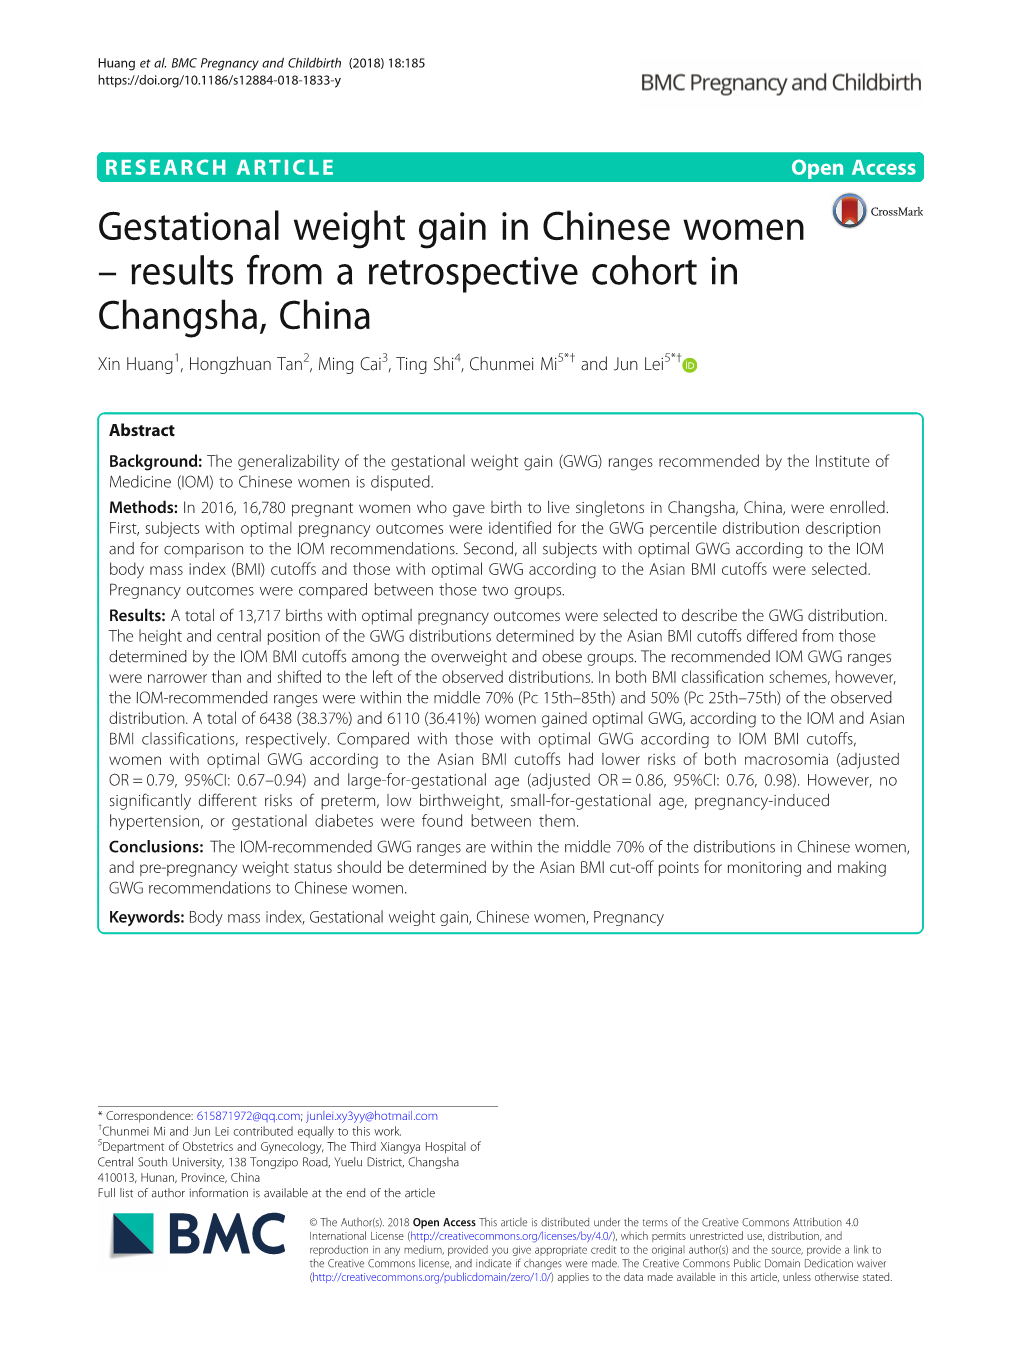 Gestational Weight Gain in Chinese Women -- Results from A